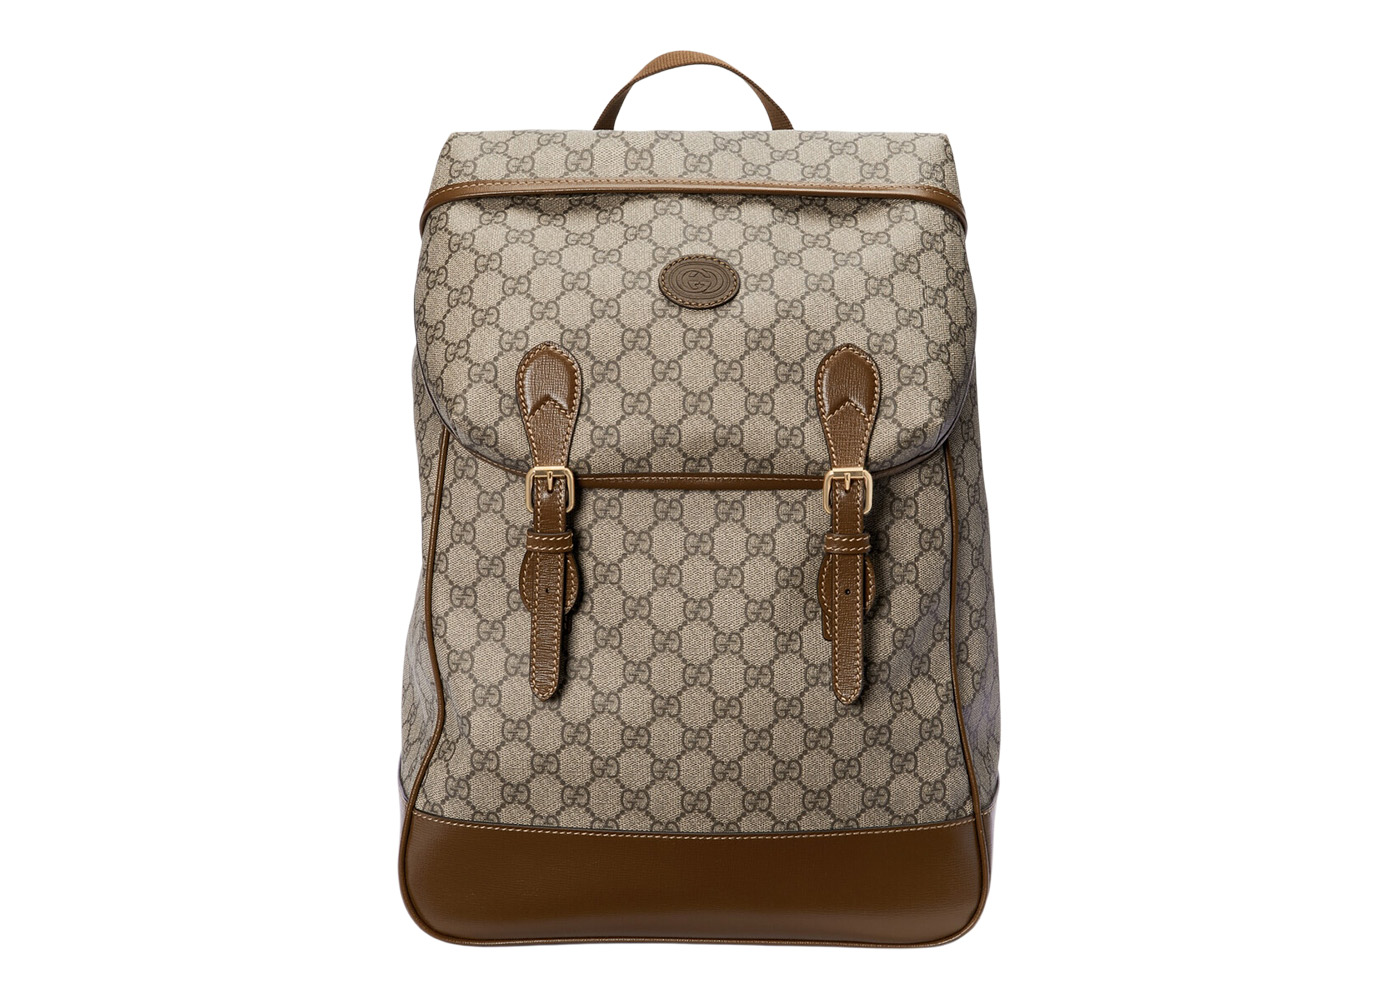 Gucci Backpack Medium GG Supreme Canvas Beige/Ebony in Canvas with